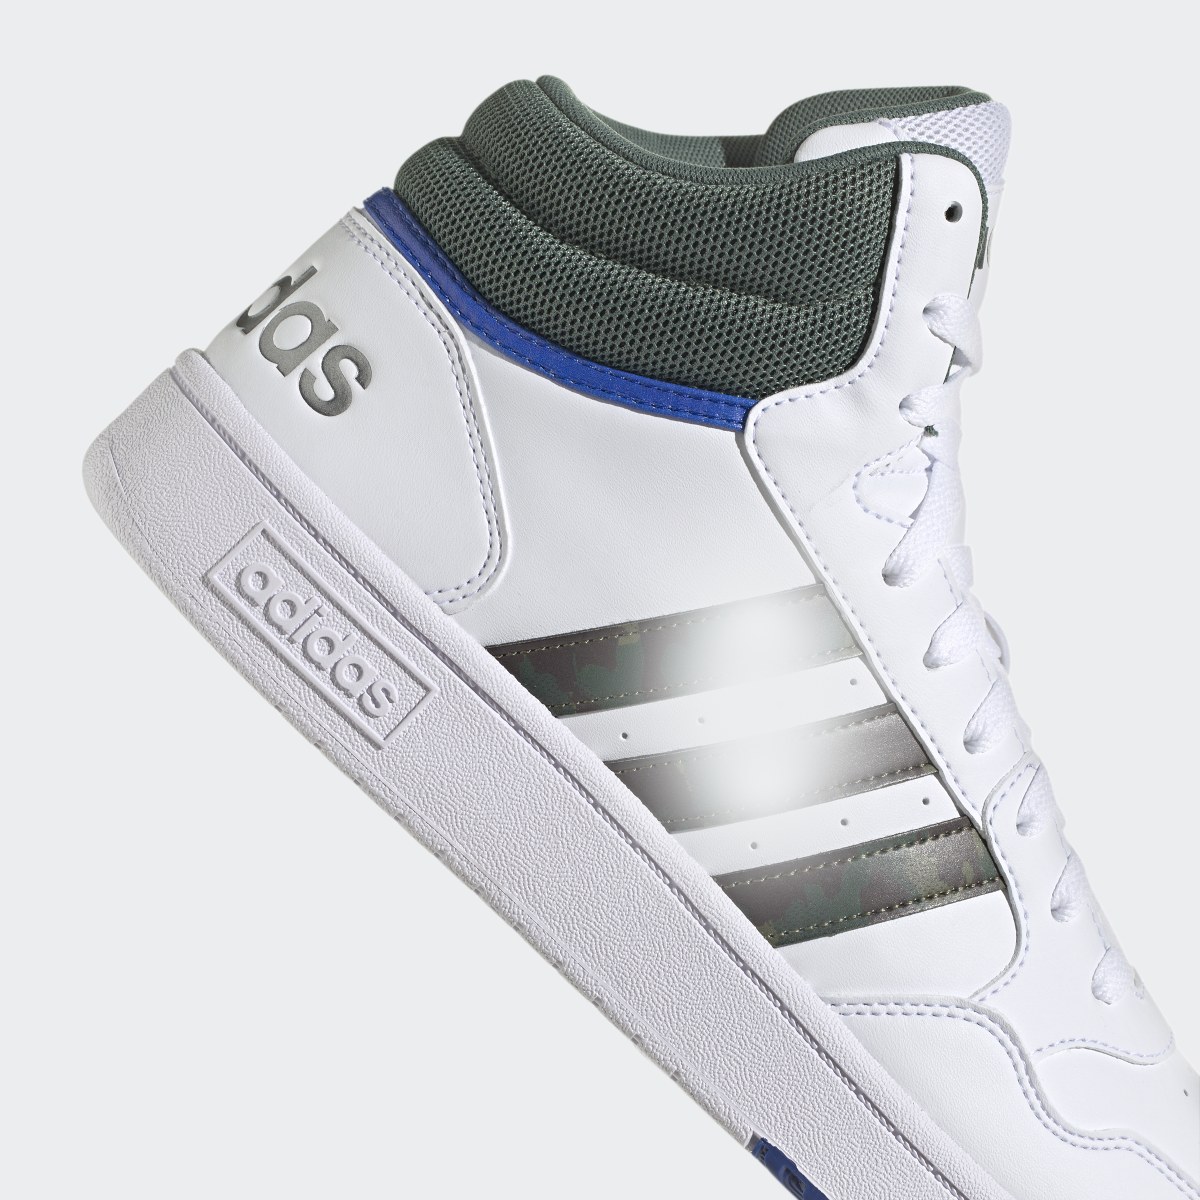 Adidas Hoops 3.0 Mid Classic Vintage Shoes. 9